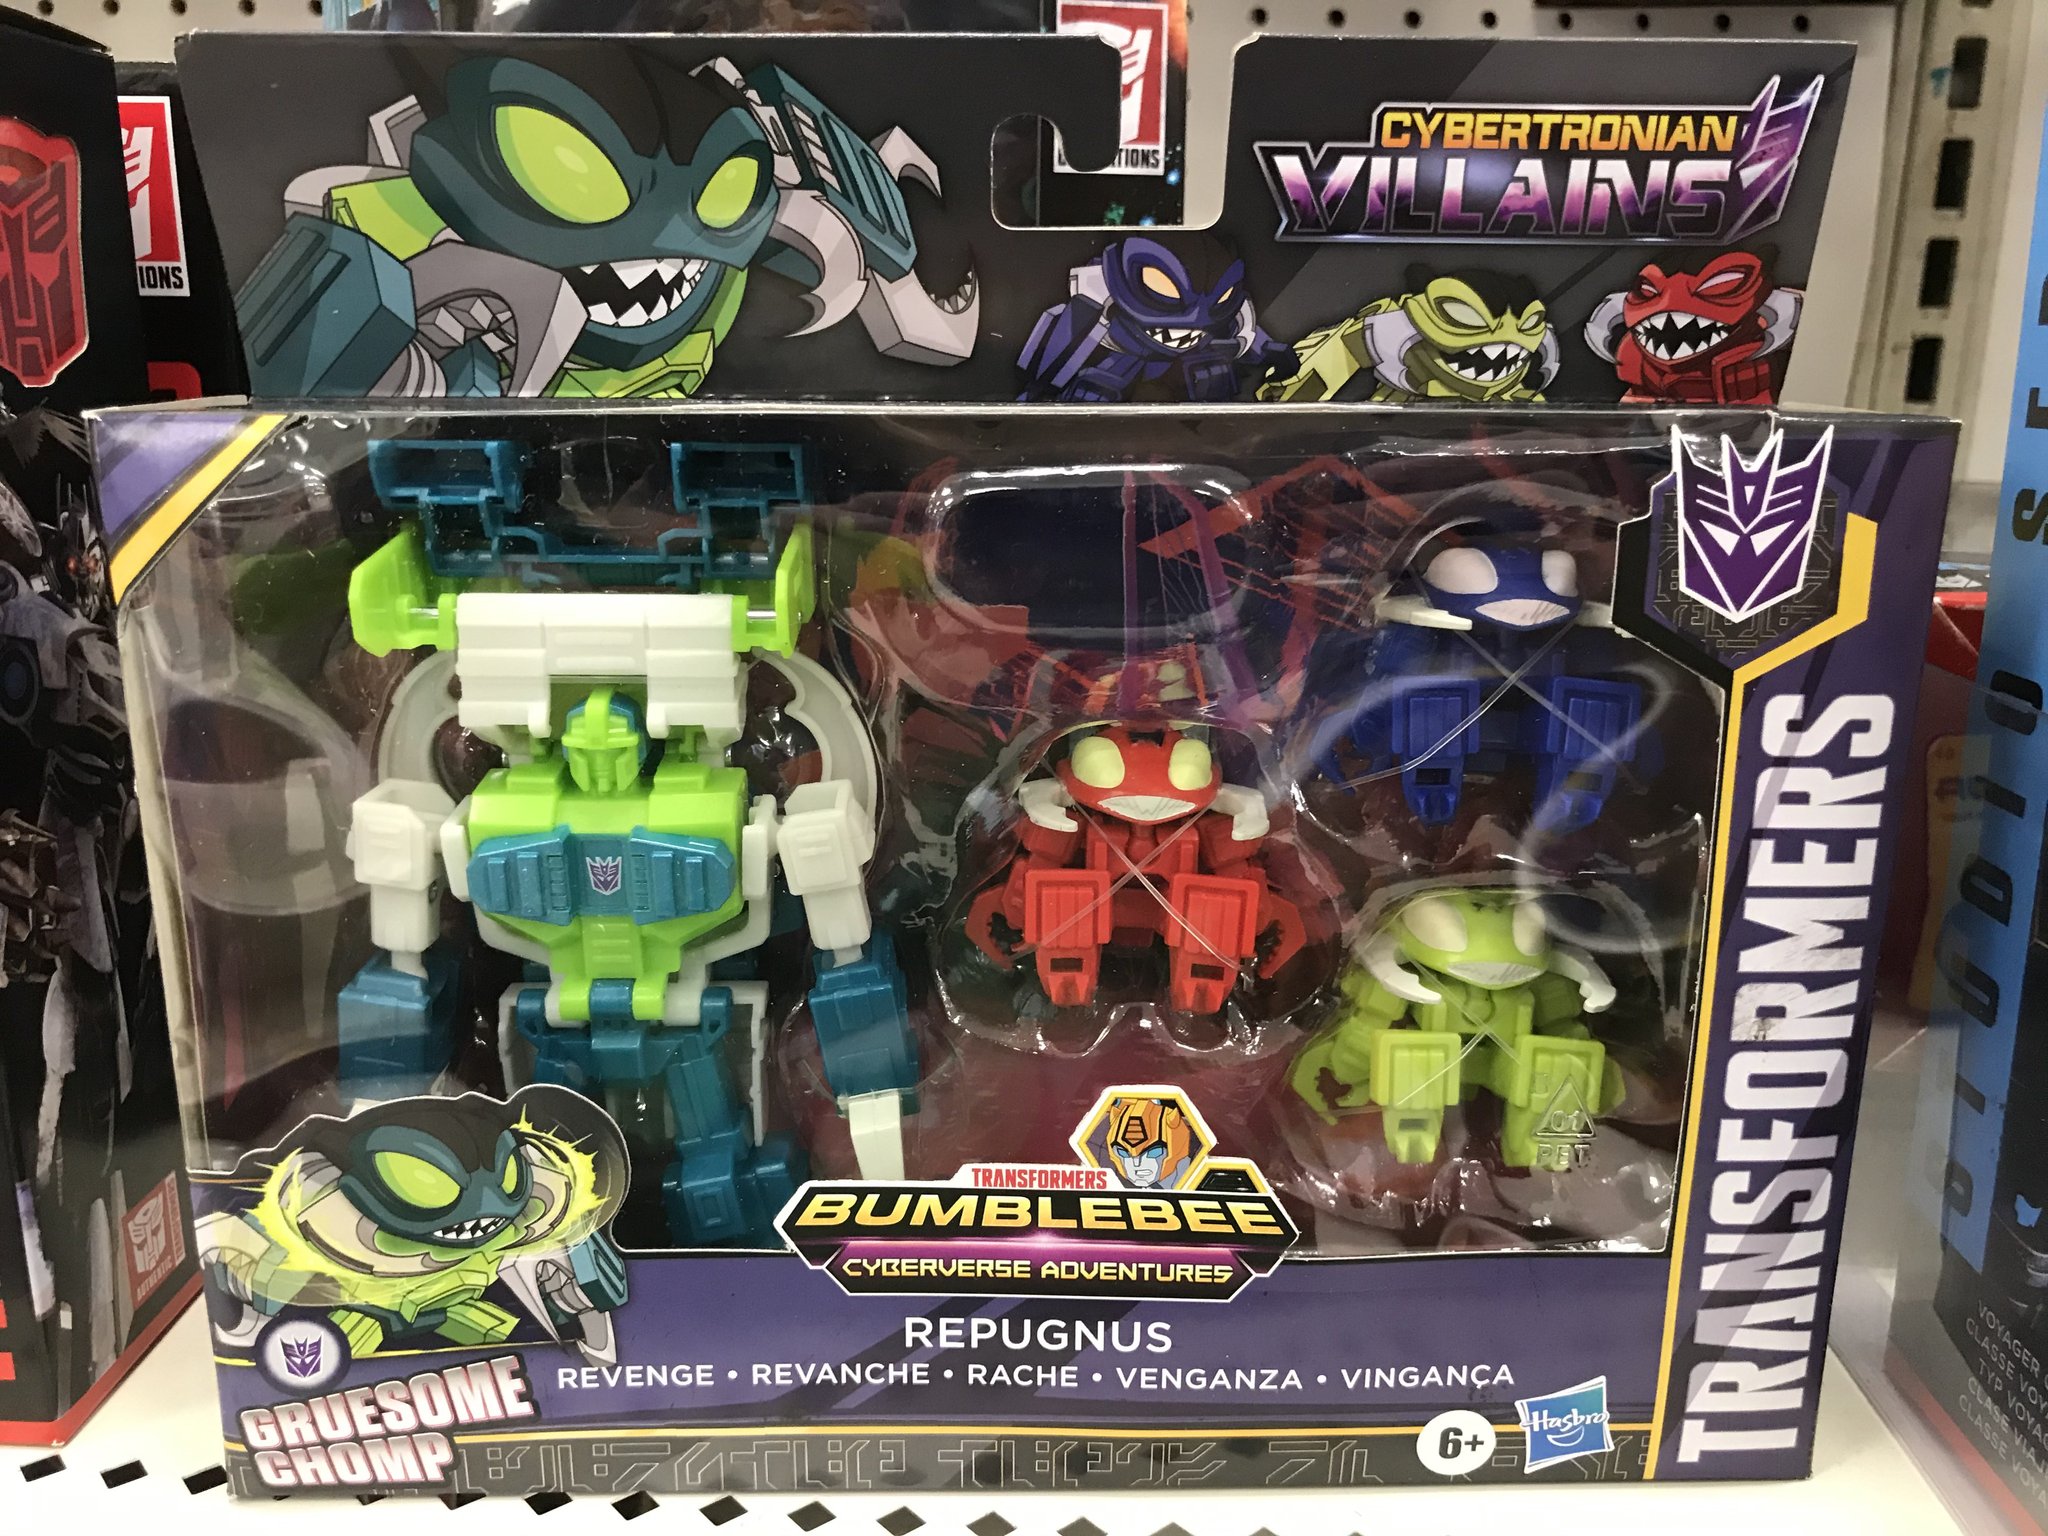 New Transformers Cyberverse Cybertronian Villains Multipacks Discovered